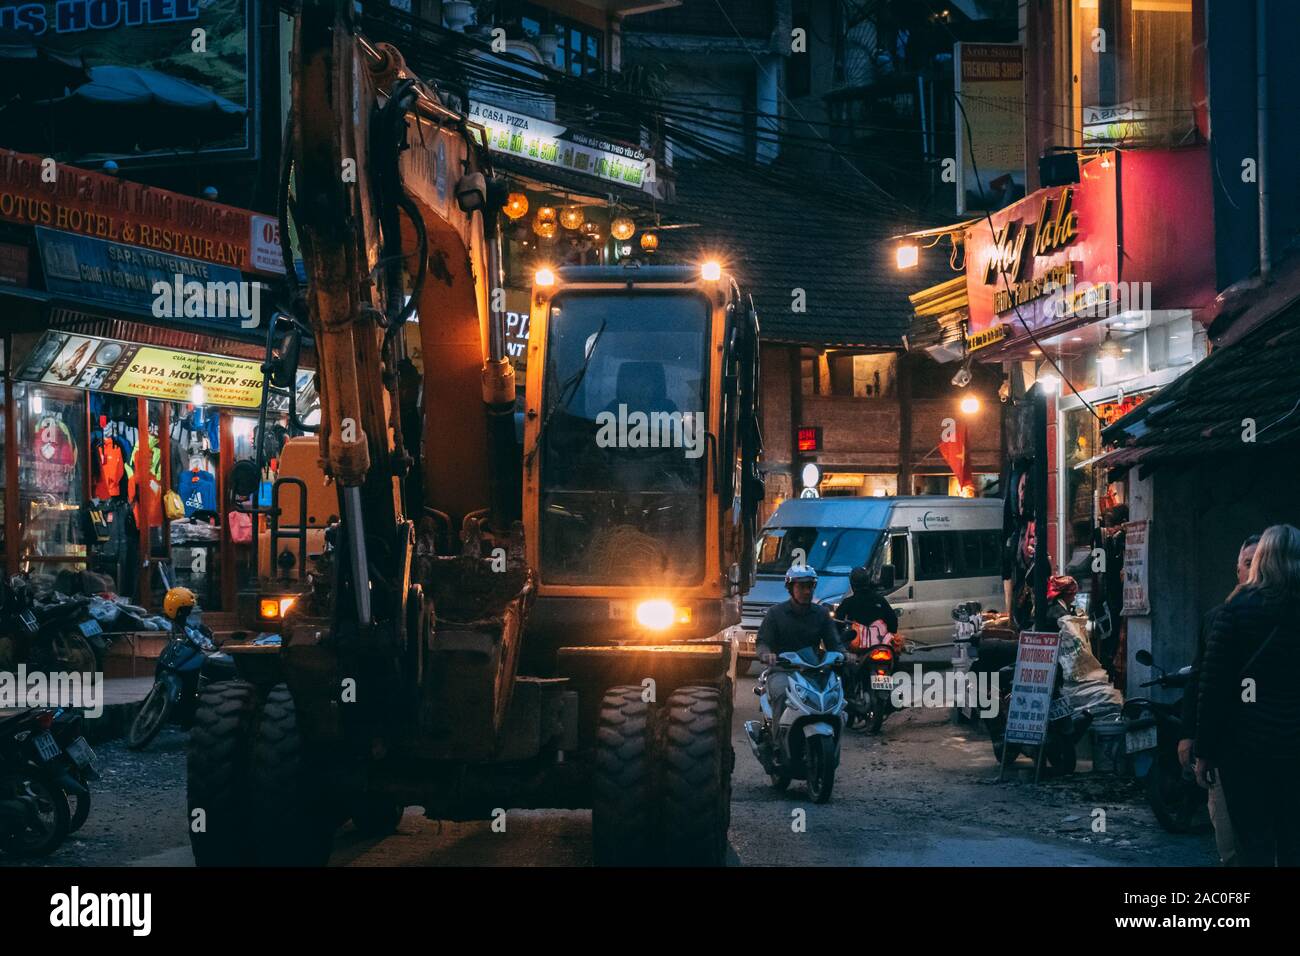 Sapa, Vietnam - 8th October 2019: Diggers travel through the narrow streets of Sapa during the night as they expand and develop the tourist town Stock Photo